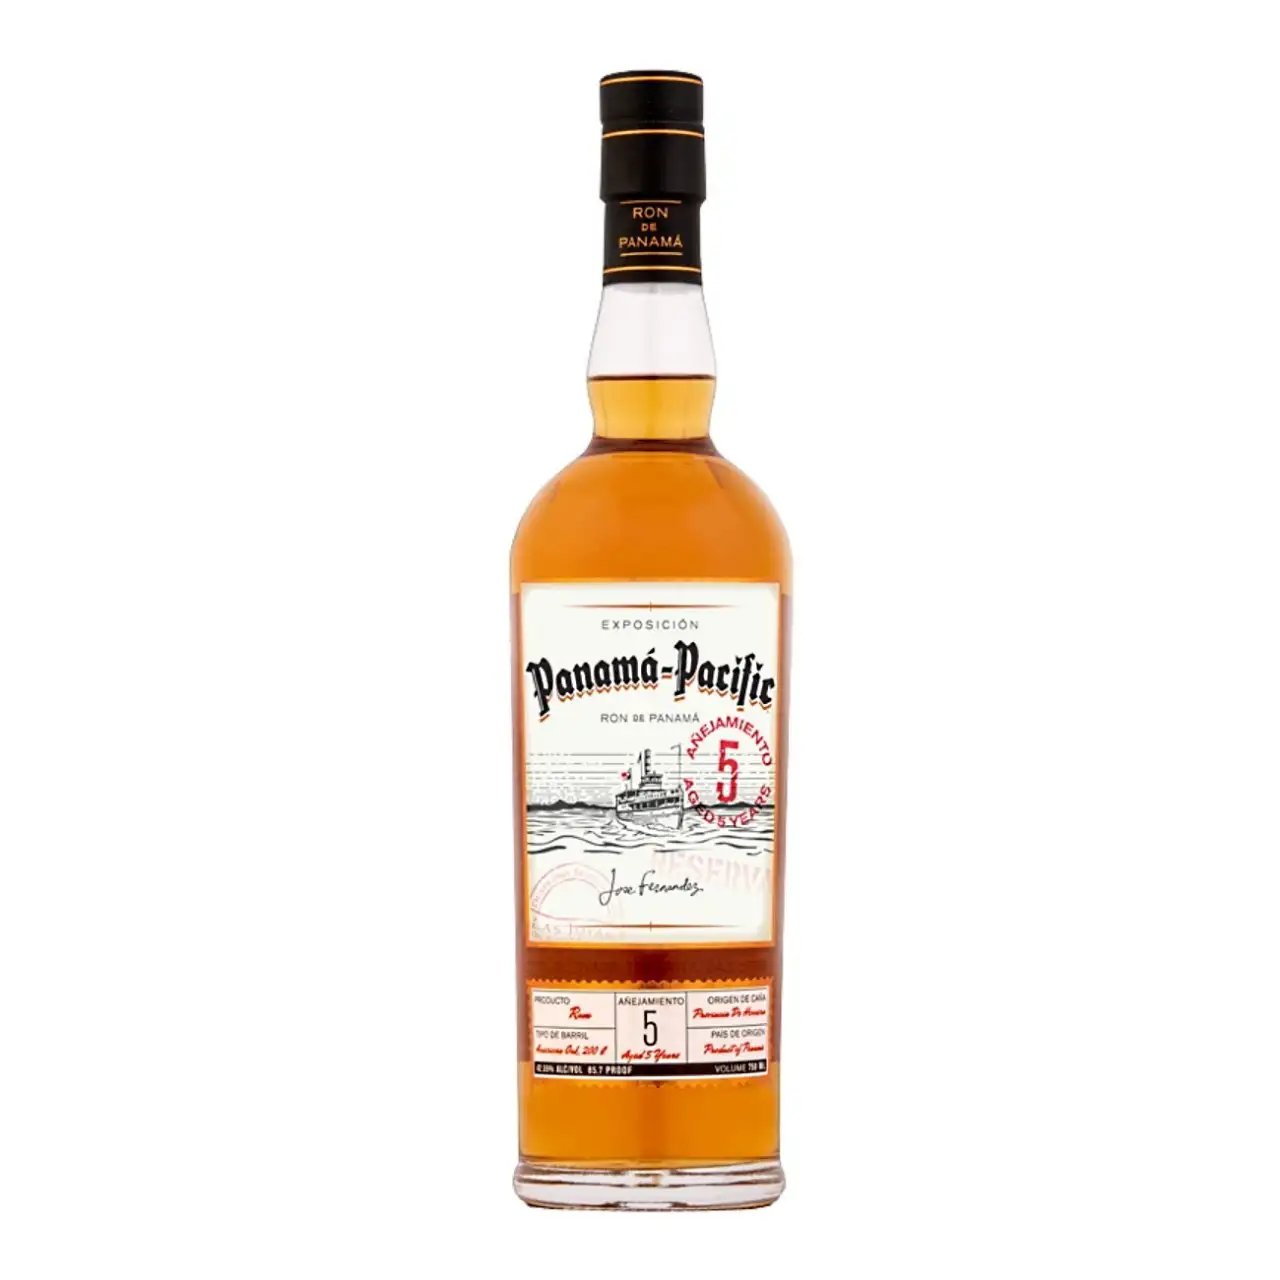 Image of the front of the bottle of the rum Panama-Pacific Aged 5 Years